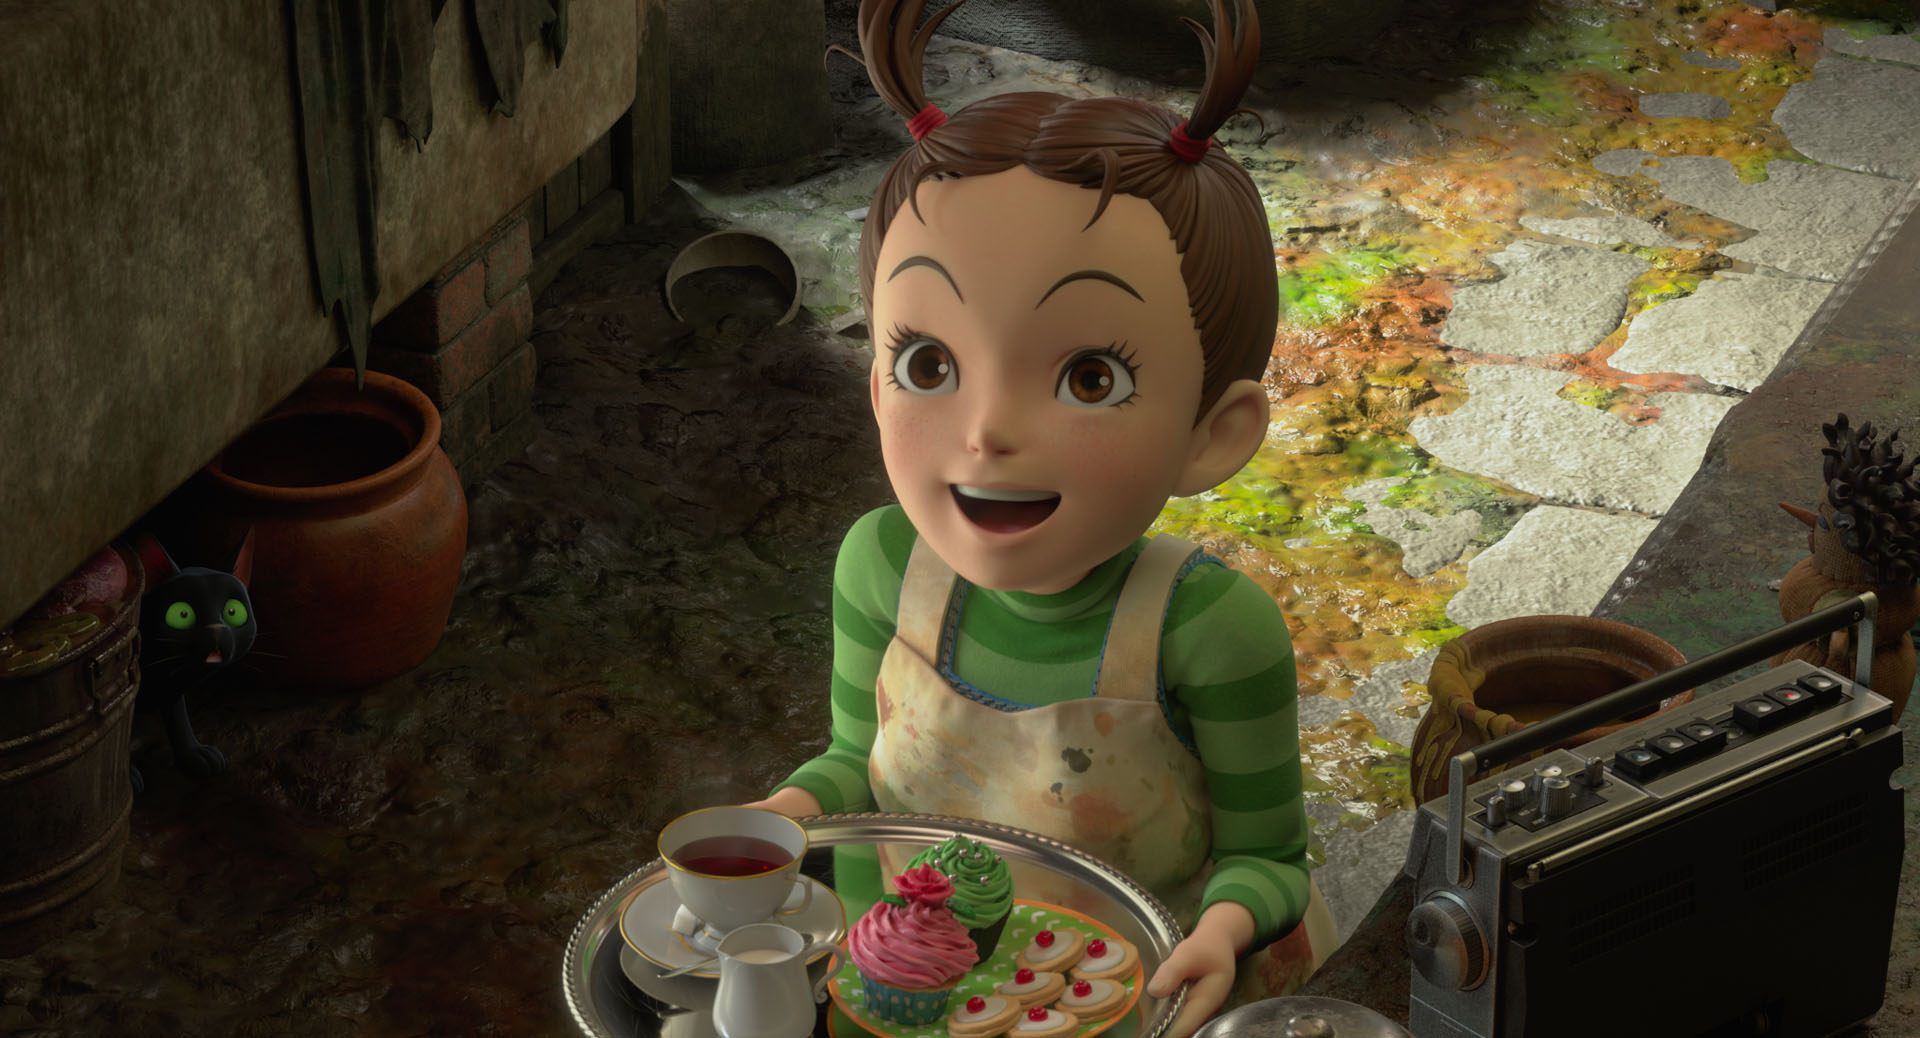 Studio Ghibli’s first CG film, ‘Earwig and the Witch,’ is an insult